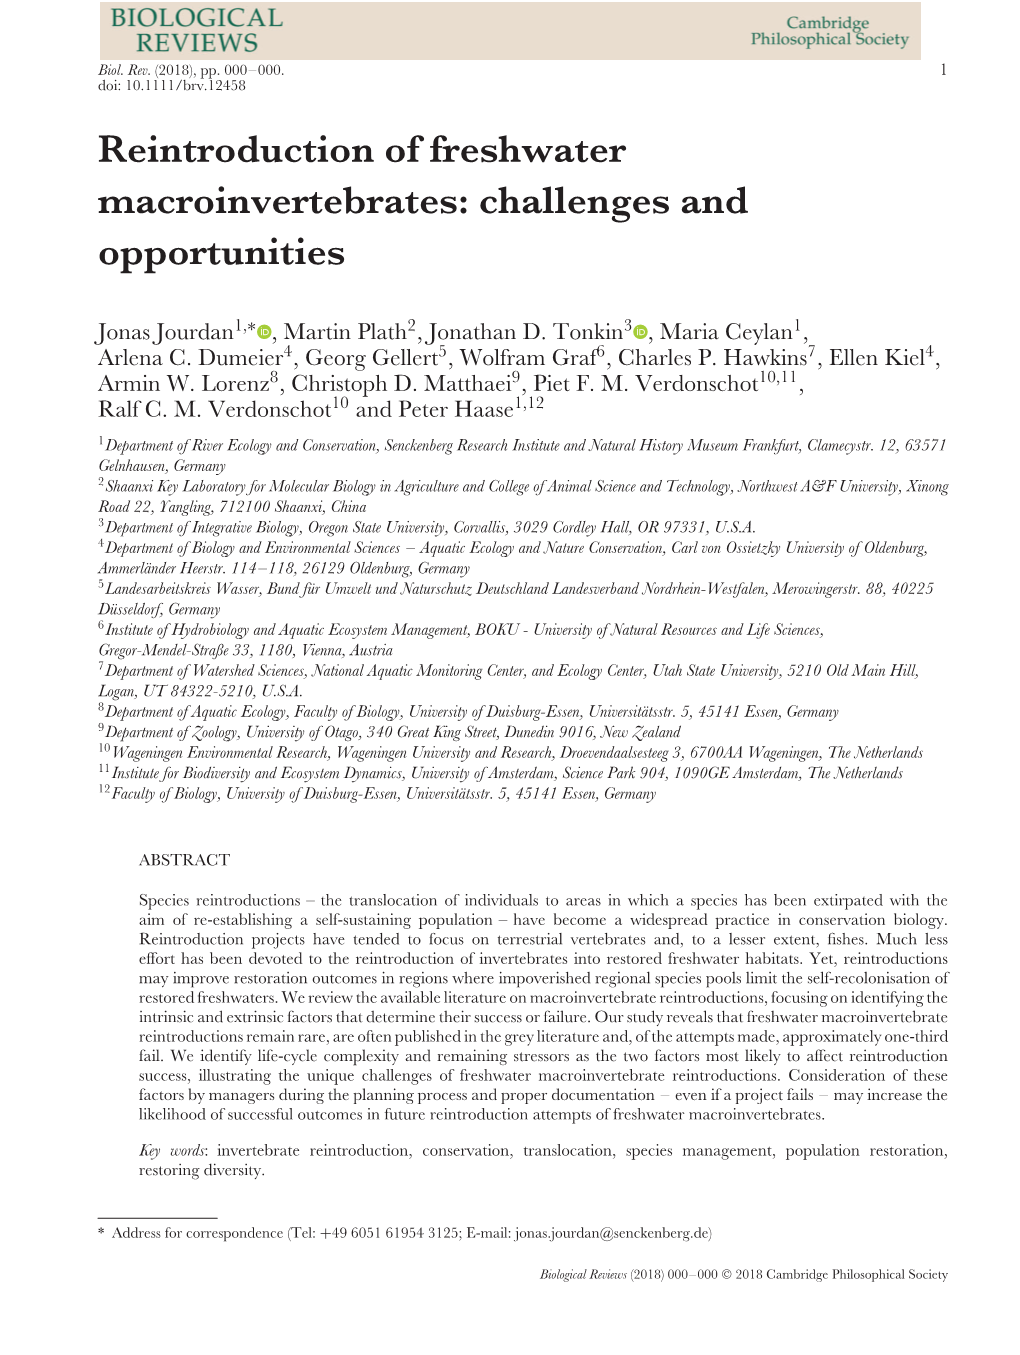 Reintroduction of Freshwater Macroinvertebrates: Challenges and Opportunities